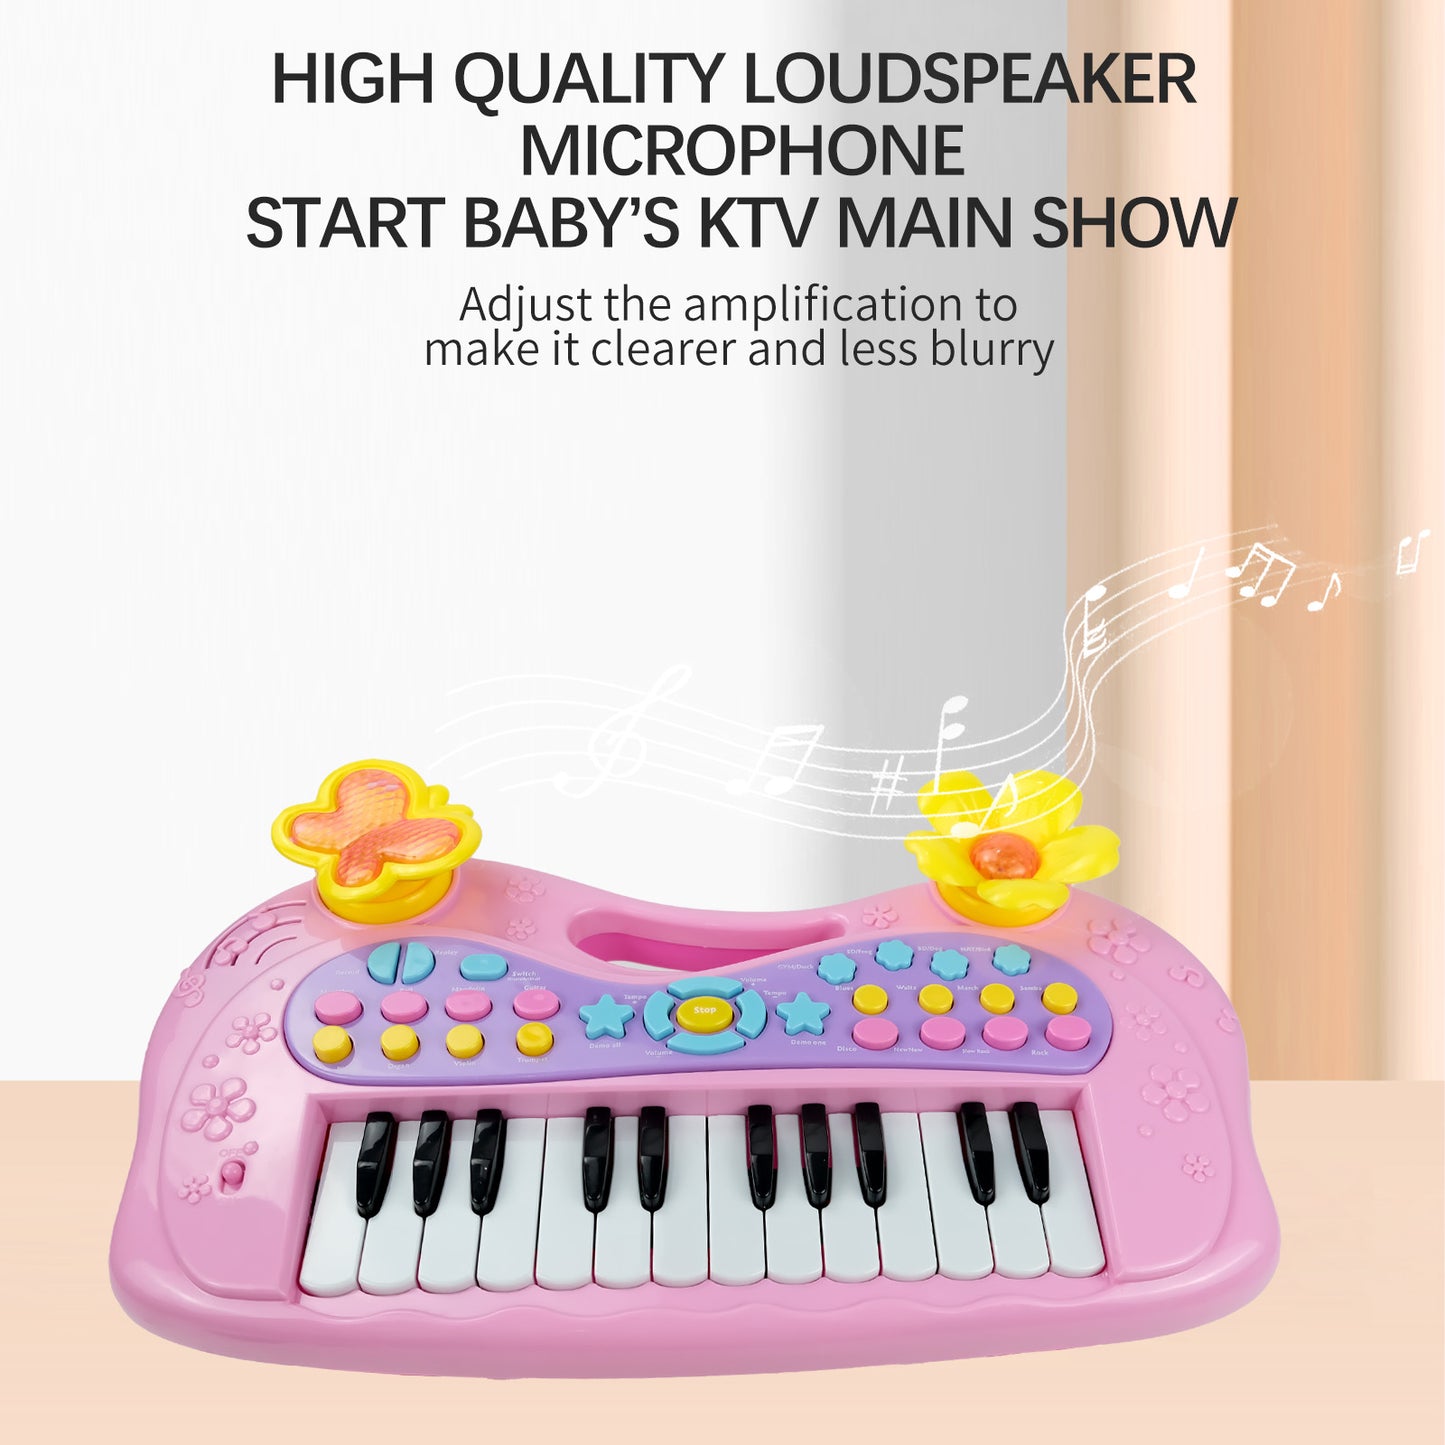 AOQIMITENJOY Musical Instrument Electronic 31 Keys Keyboard Toys LED Lighting Children's Toys Birthday Gifts for Boys and Girls 3 Year Old+ HK-6013A